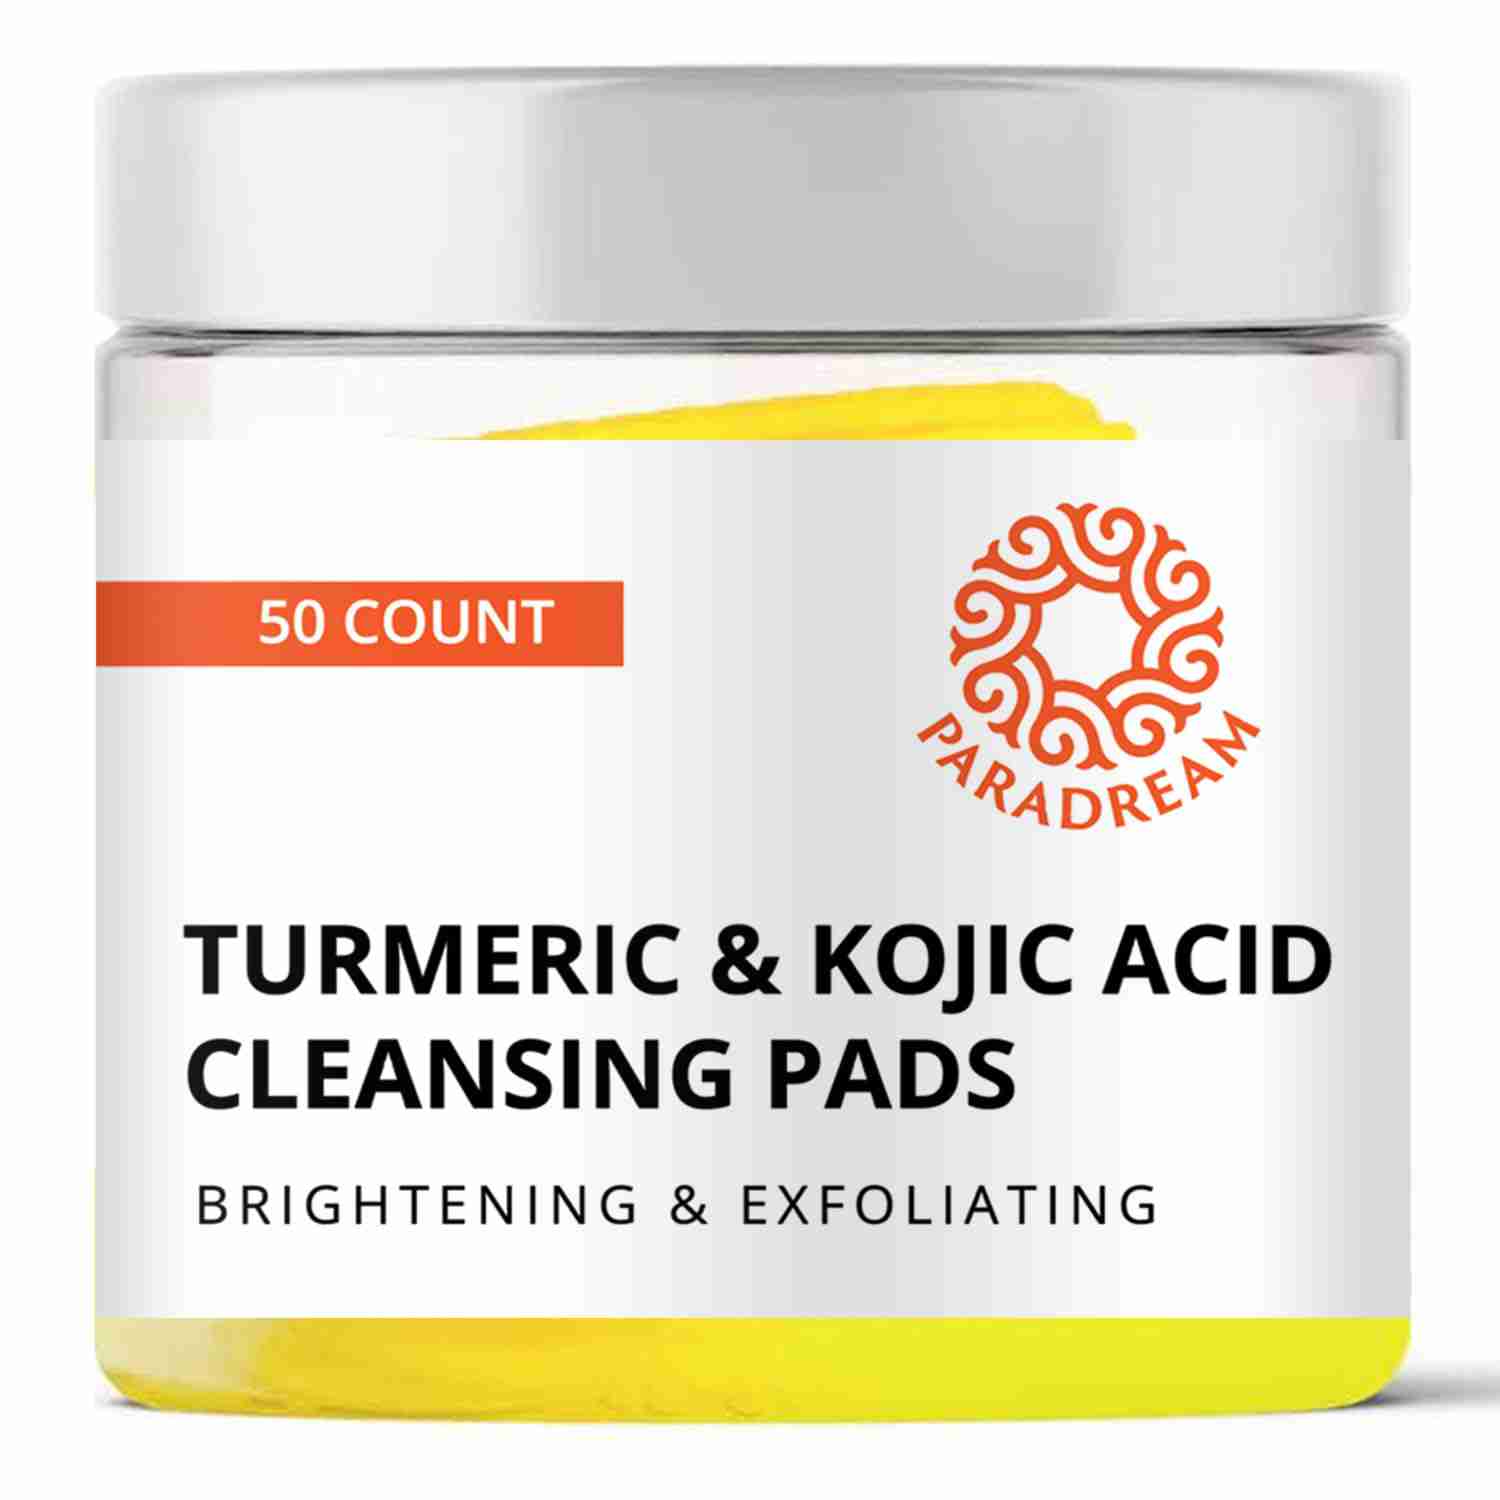 turmeric-cleansing-pads-for-dark-spots with cash back rebate